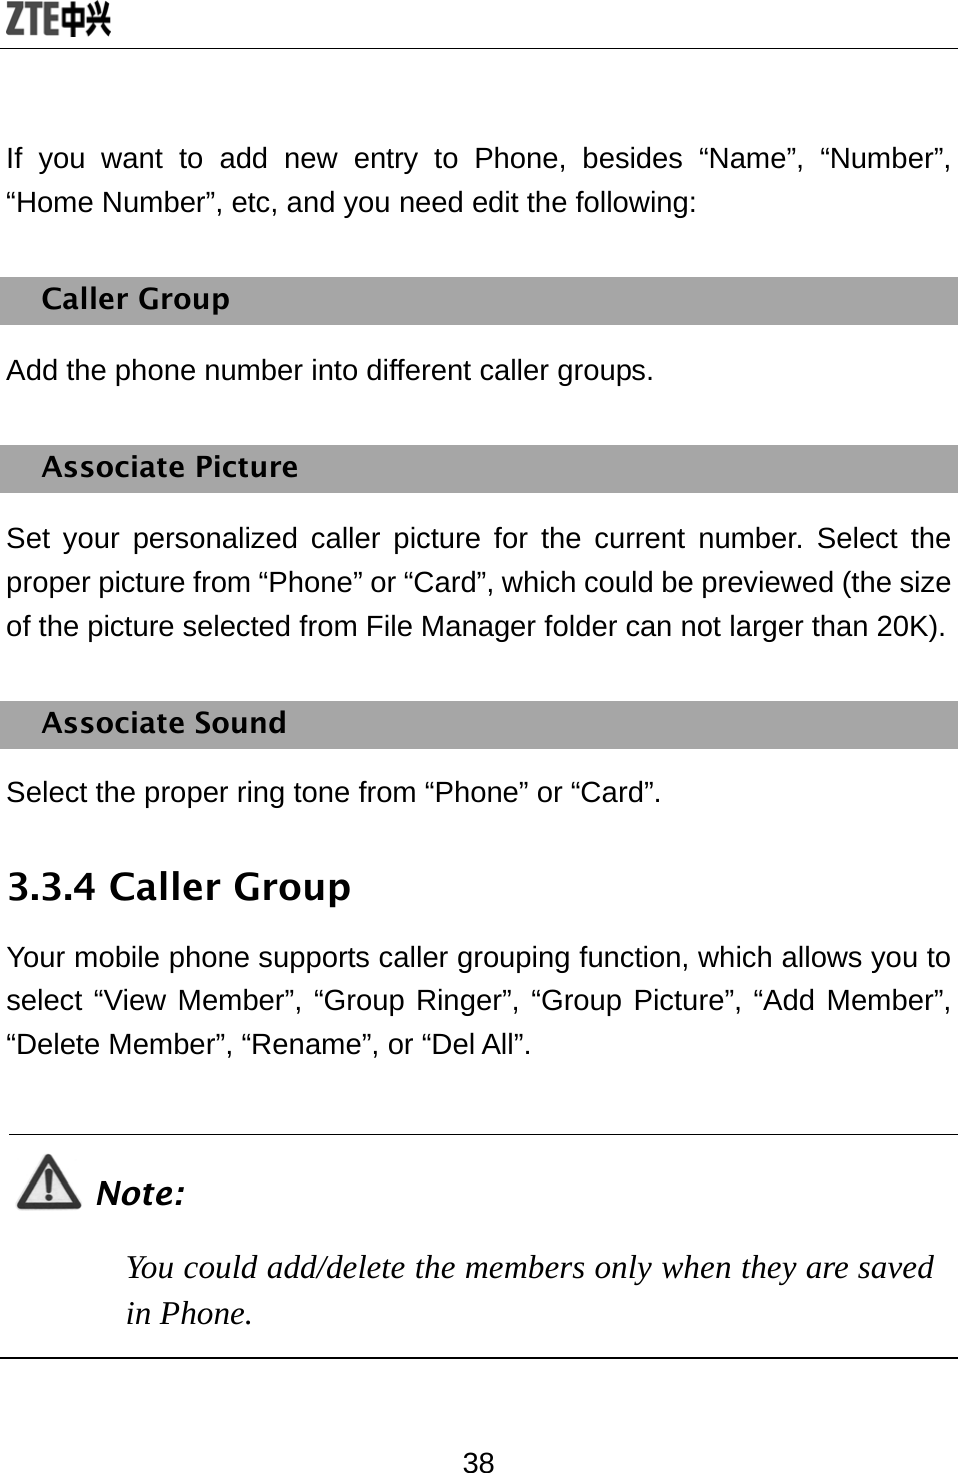  38 If you want to add new entry to Phone, besides “Name”, “Number”, “Home Number”, etc, and you need edit the following: Caller Group Add the phone number into different caller groups. Associate Picture Set your personalized caller picture for the current number. Select the proper picture from “Phone” or “Card”, which could be previewed (the size of the picture selected from File Manager folder can not larger than 20K). Associate Sound Select the proper ring tone from “Phone” or “Card”.   3.3.4 Caller Group Your mobile phone supports caller grouping function, which allows you to select “View Member”, “Group Ringer”, “Group Picture”, “Add Member”, “Delete Member”, “Rename”, or “Del All”.  Note: You could add/delete the members only when they are saved in Phone.  